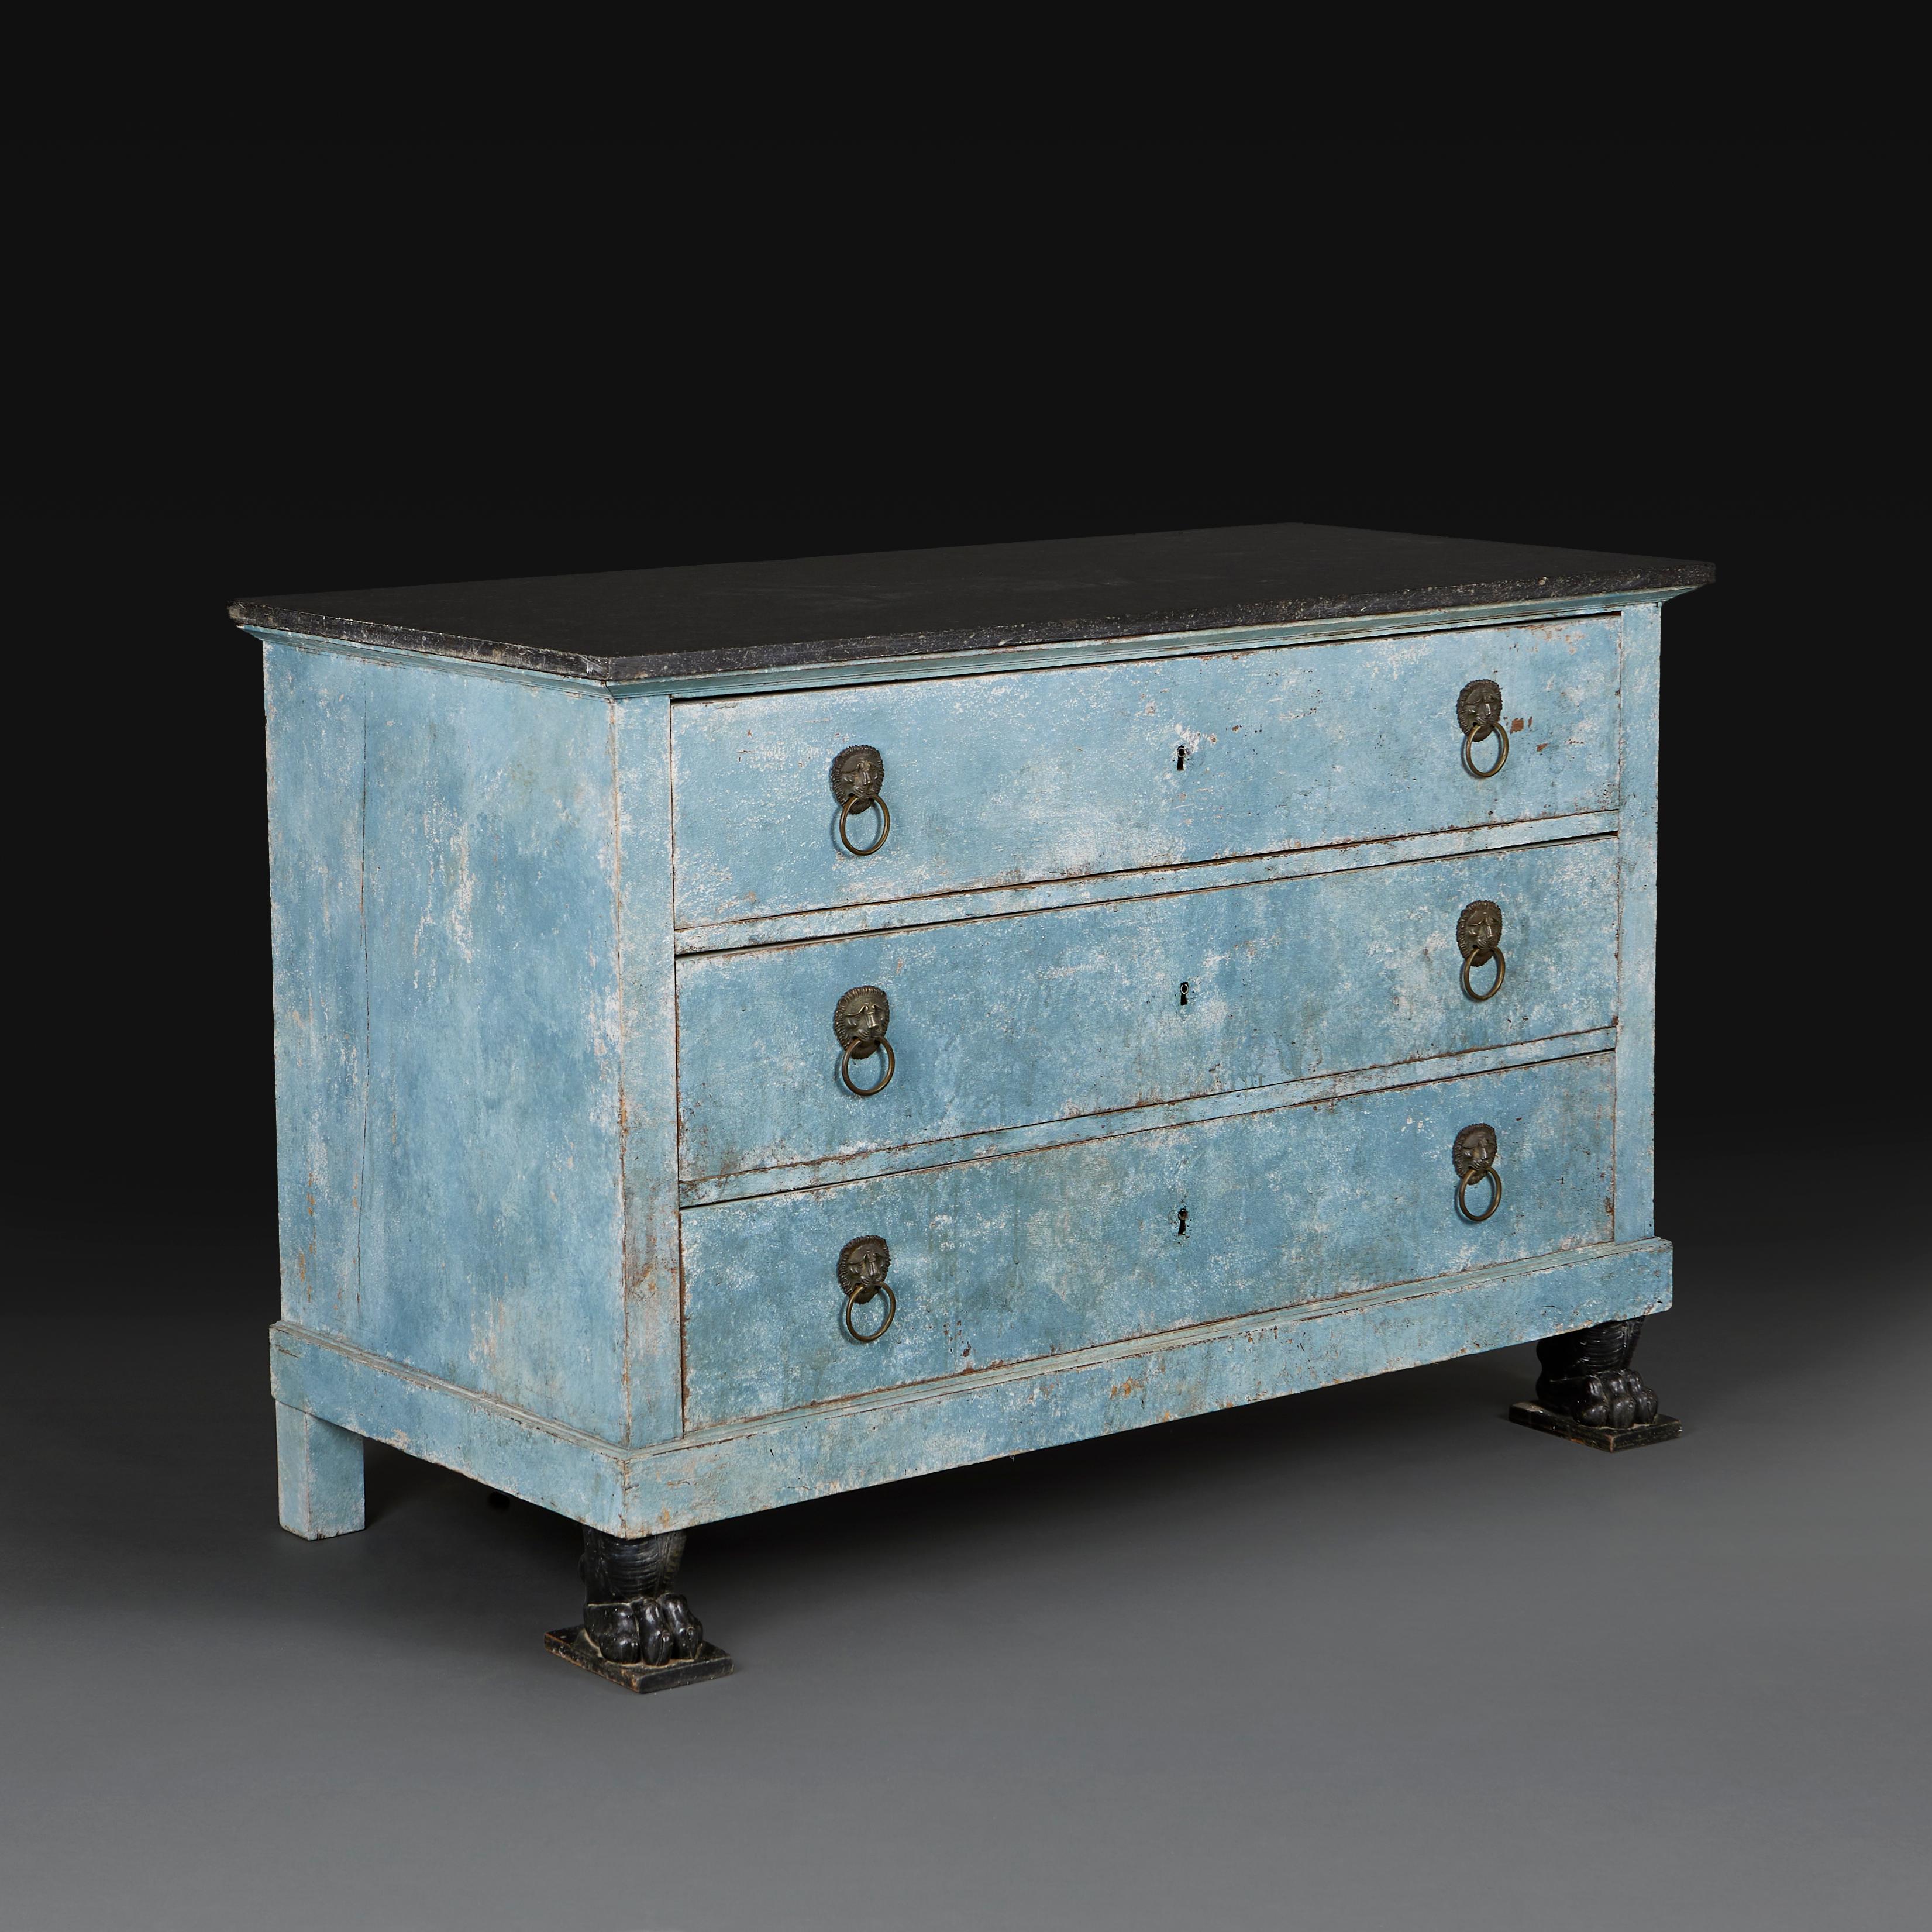 France, circa 1820
An early nineteenth century blue painted Empire commode with three drawers, bronze lion mask handles, all supported on simulated crocodile feet, with black marble top. The paint with restorations. 

Height  87.50cm
Width  